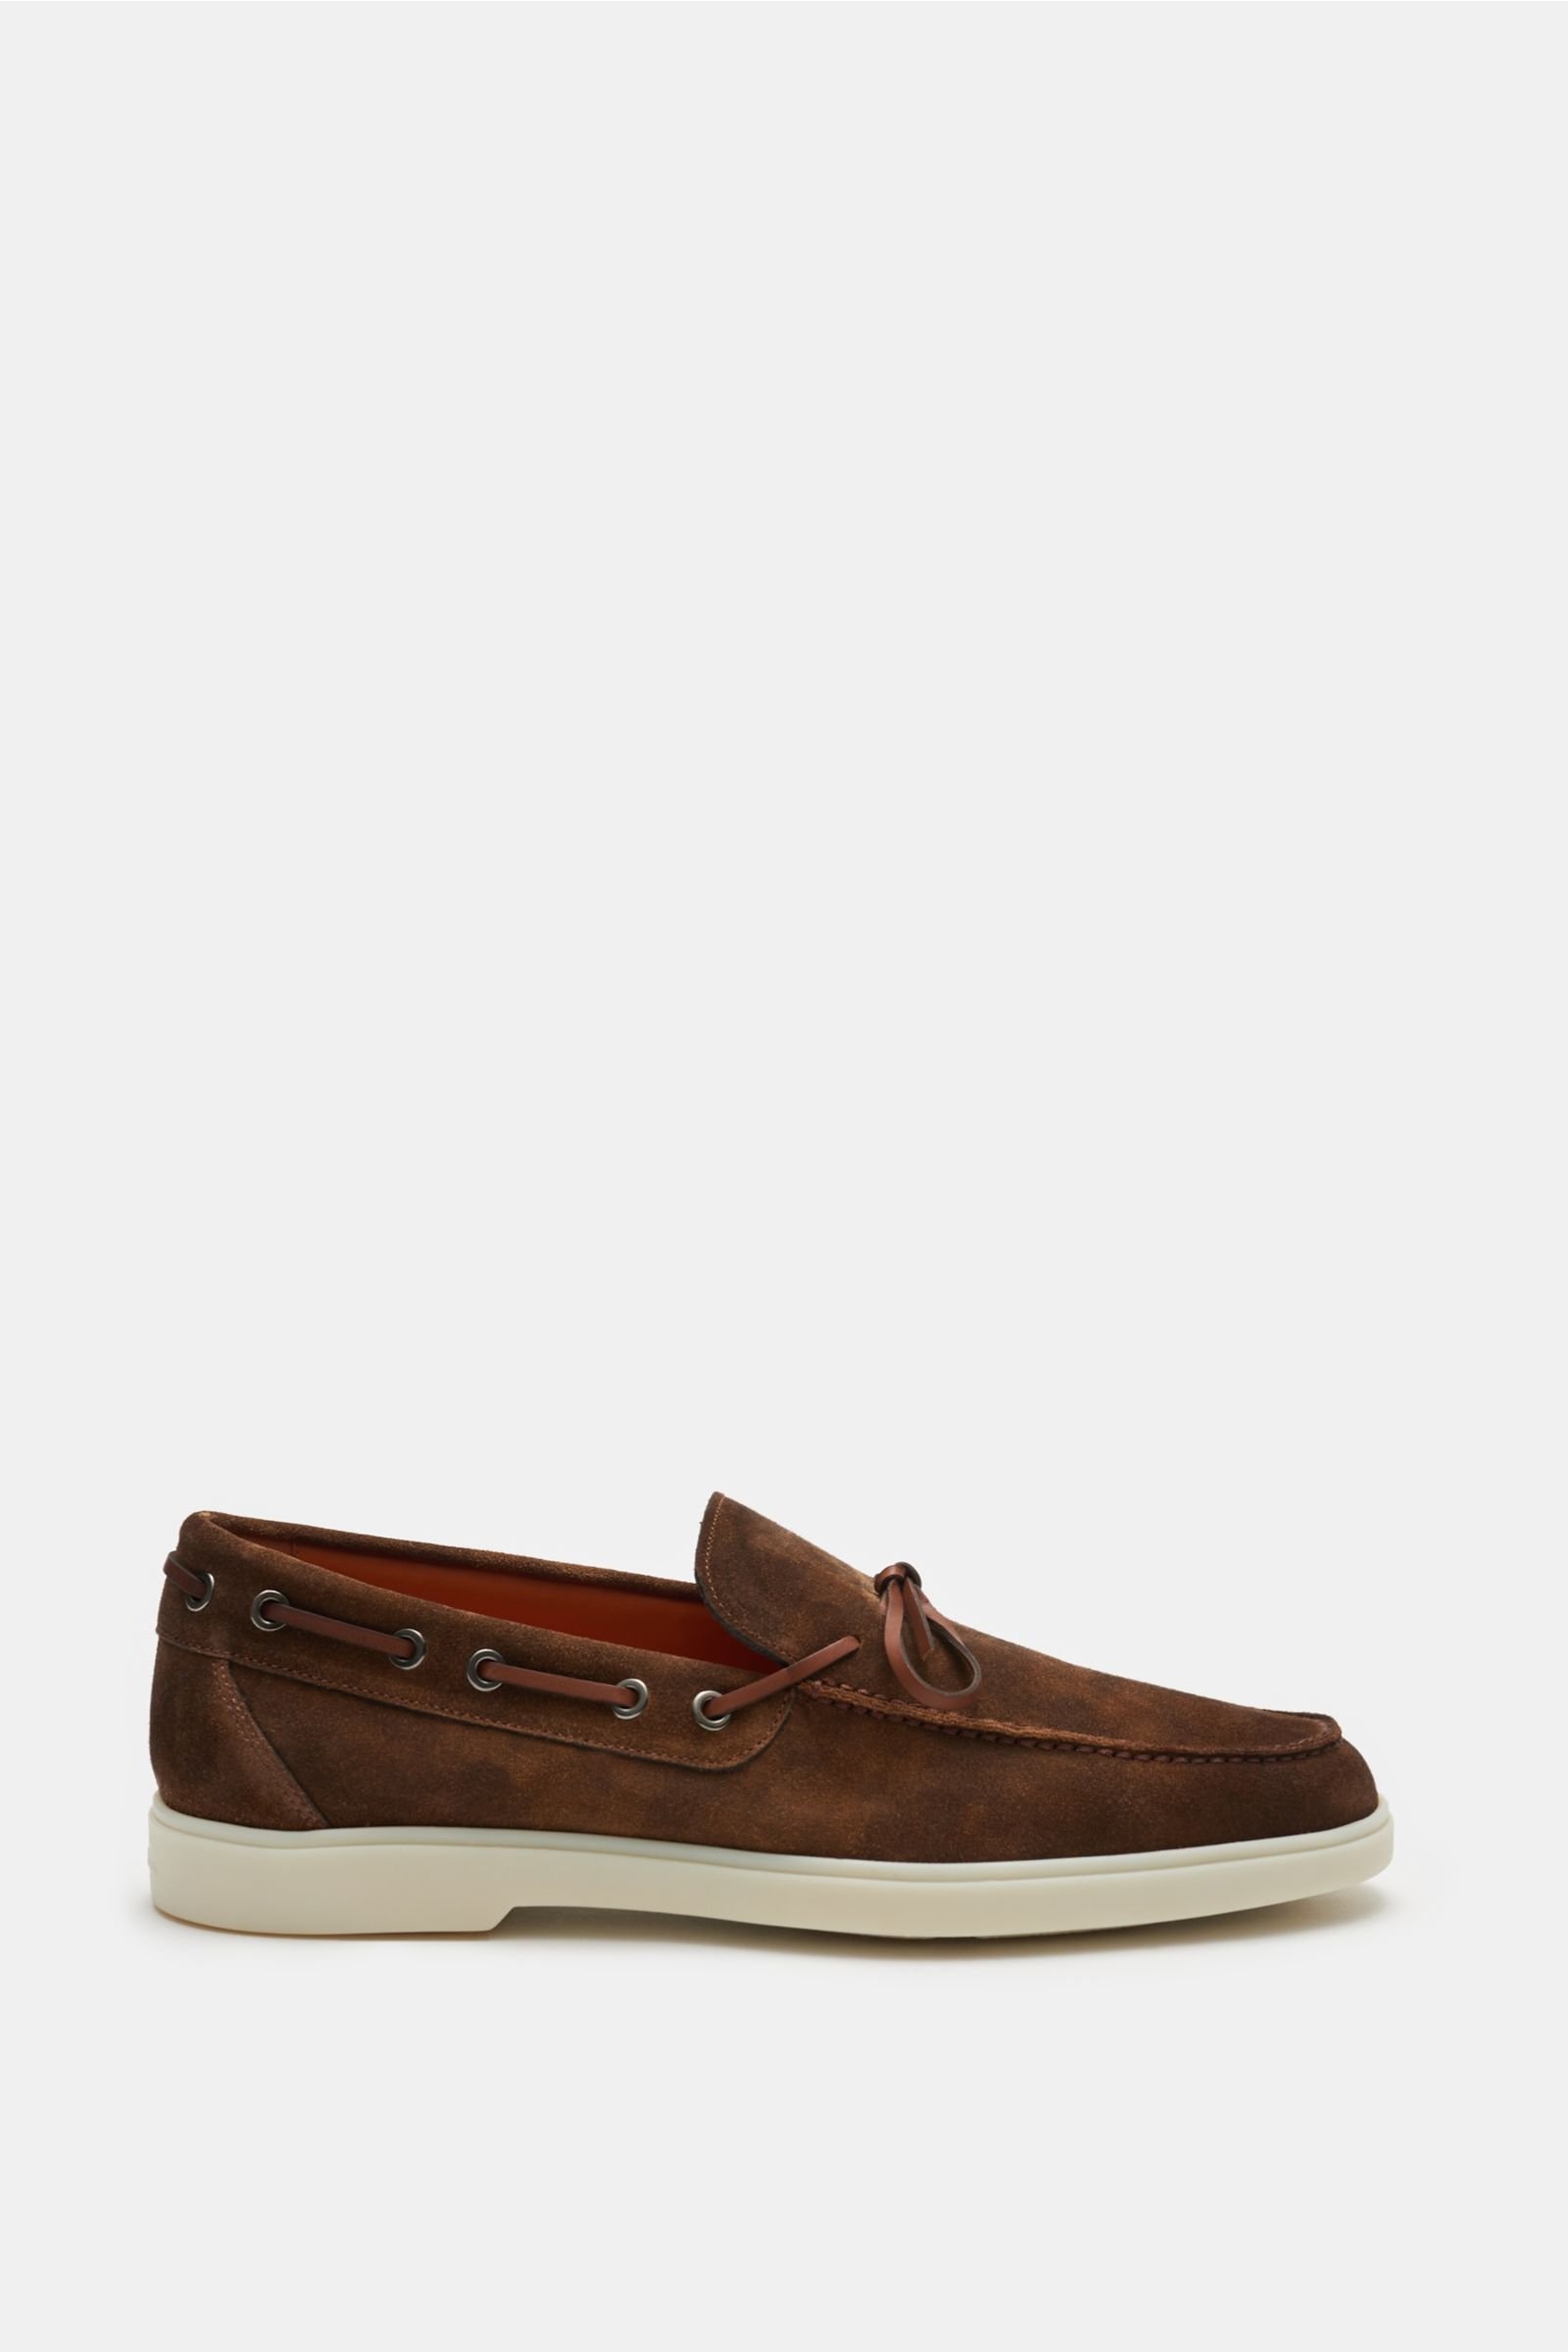 Boat shoes brown